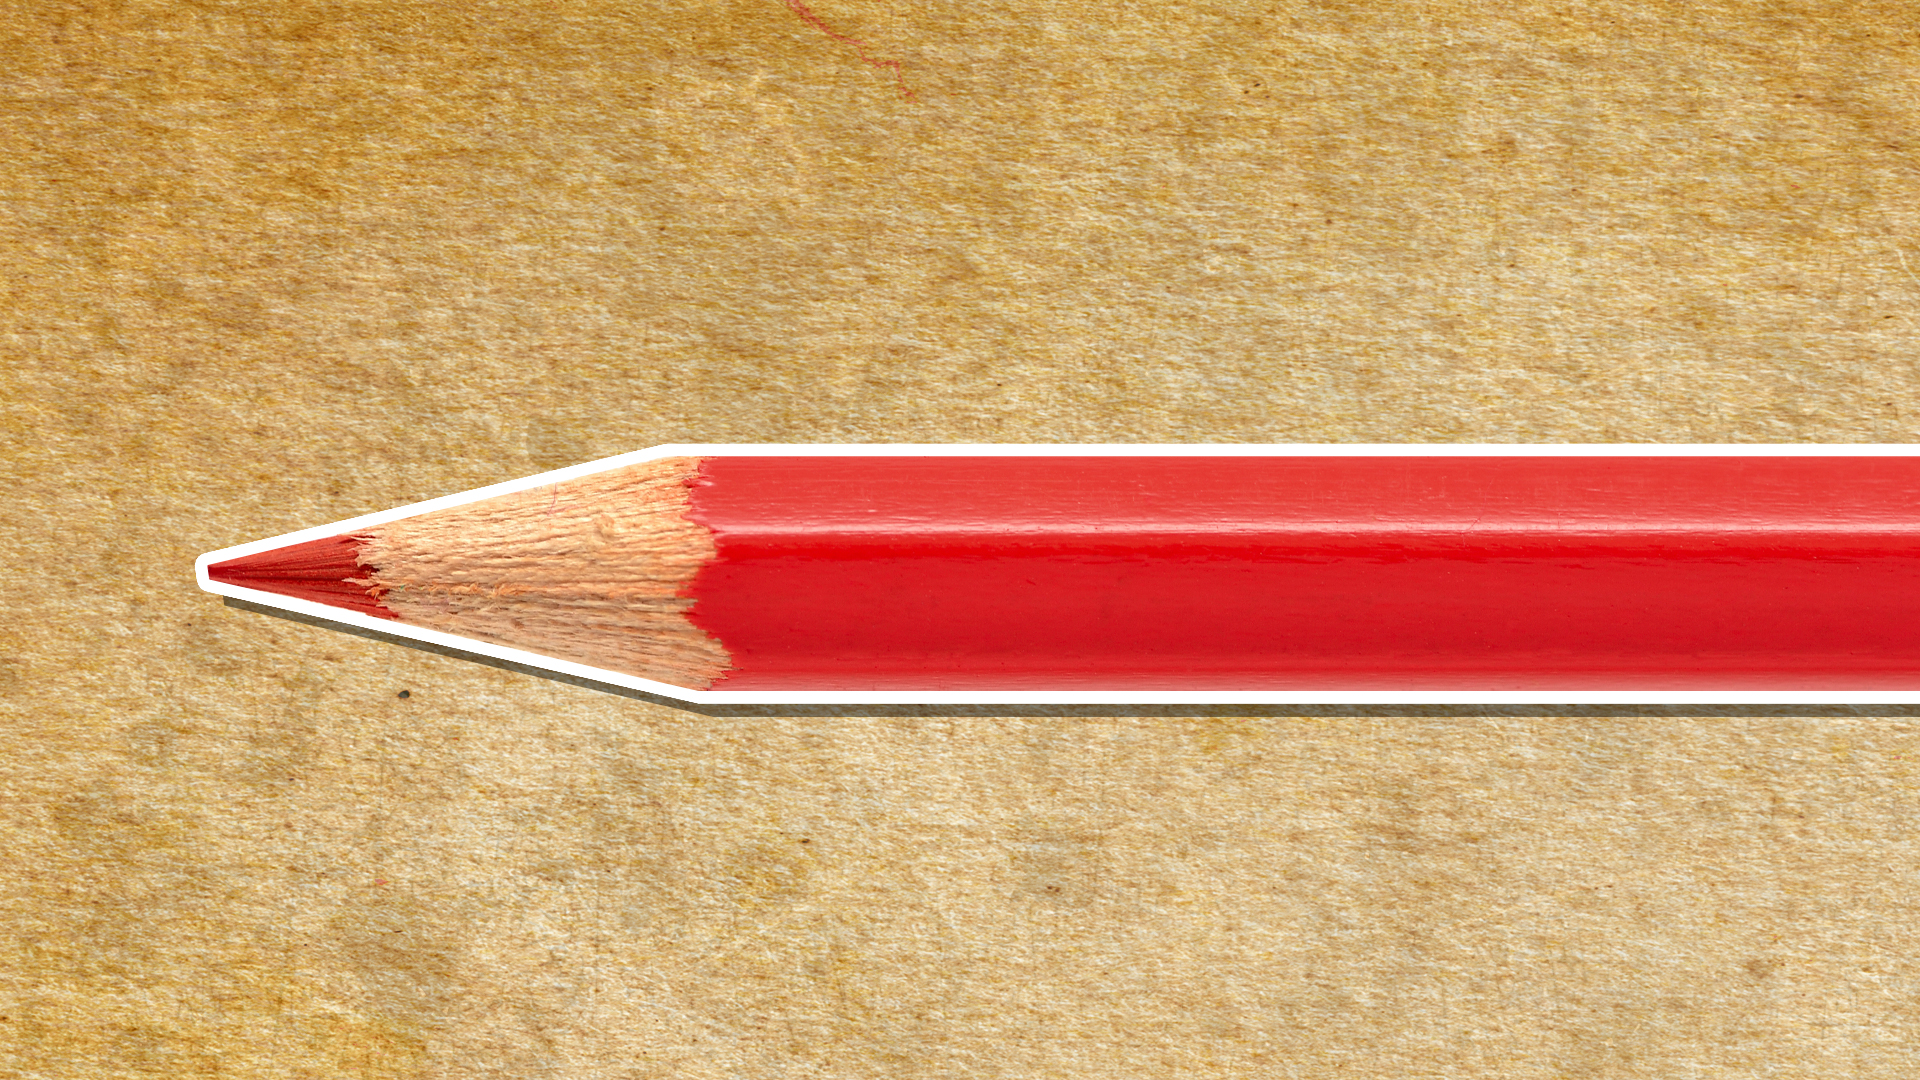 A red pencil 